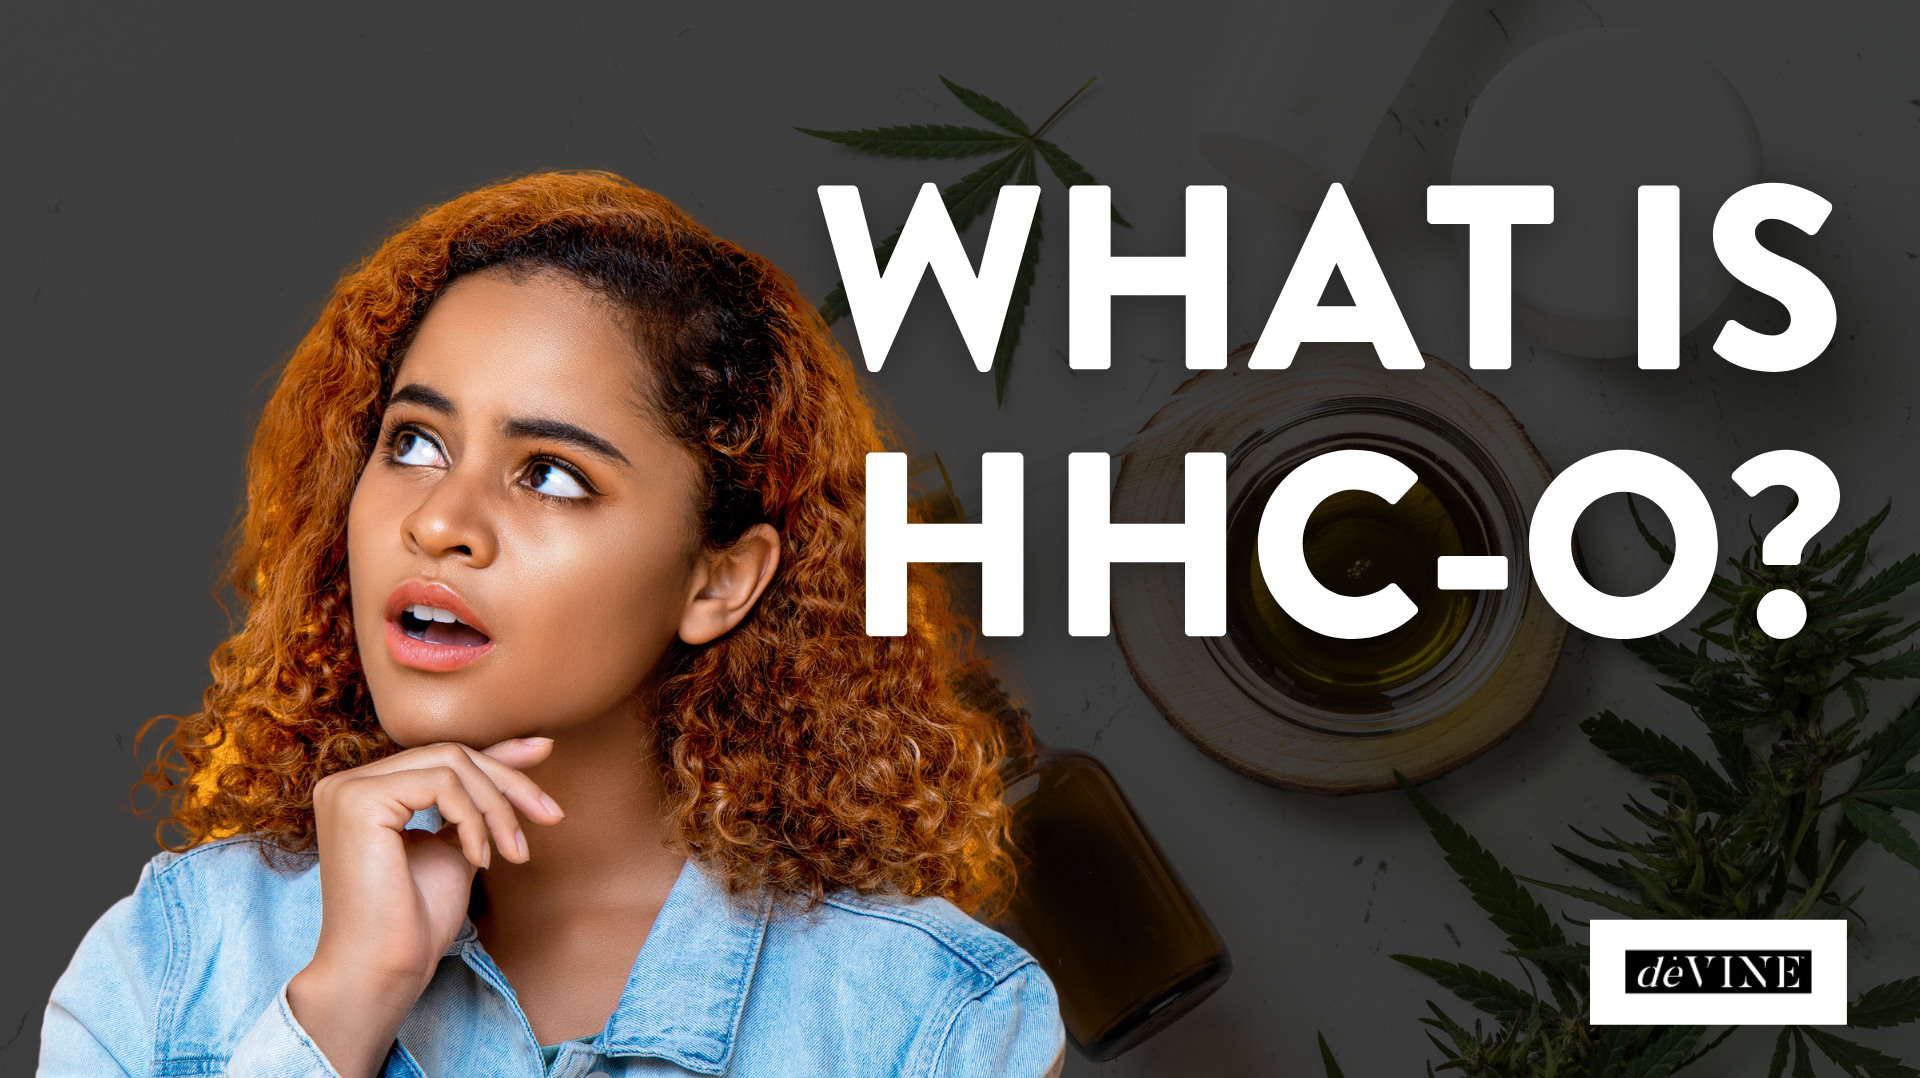 What is HHC-O?